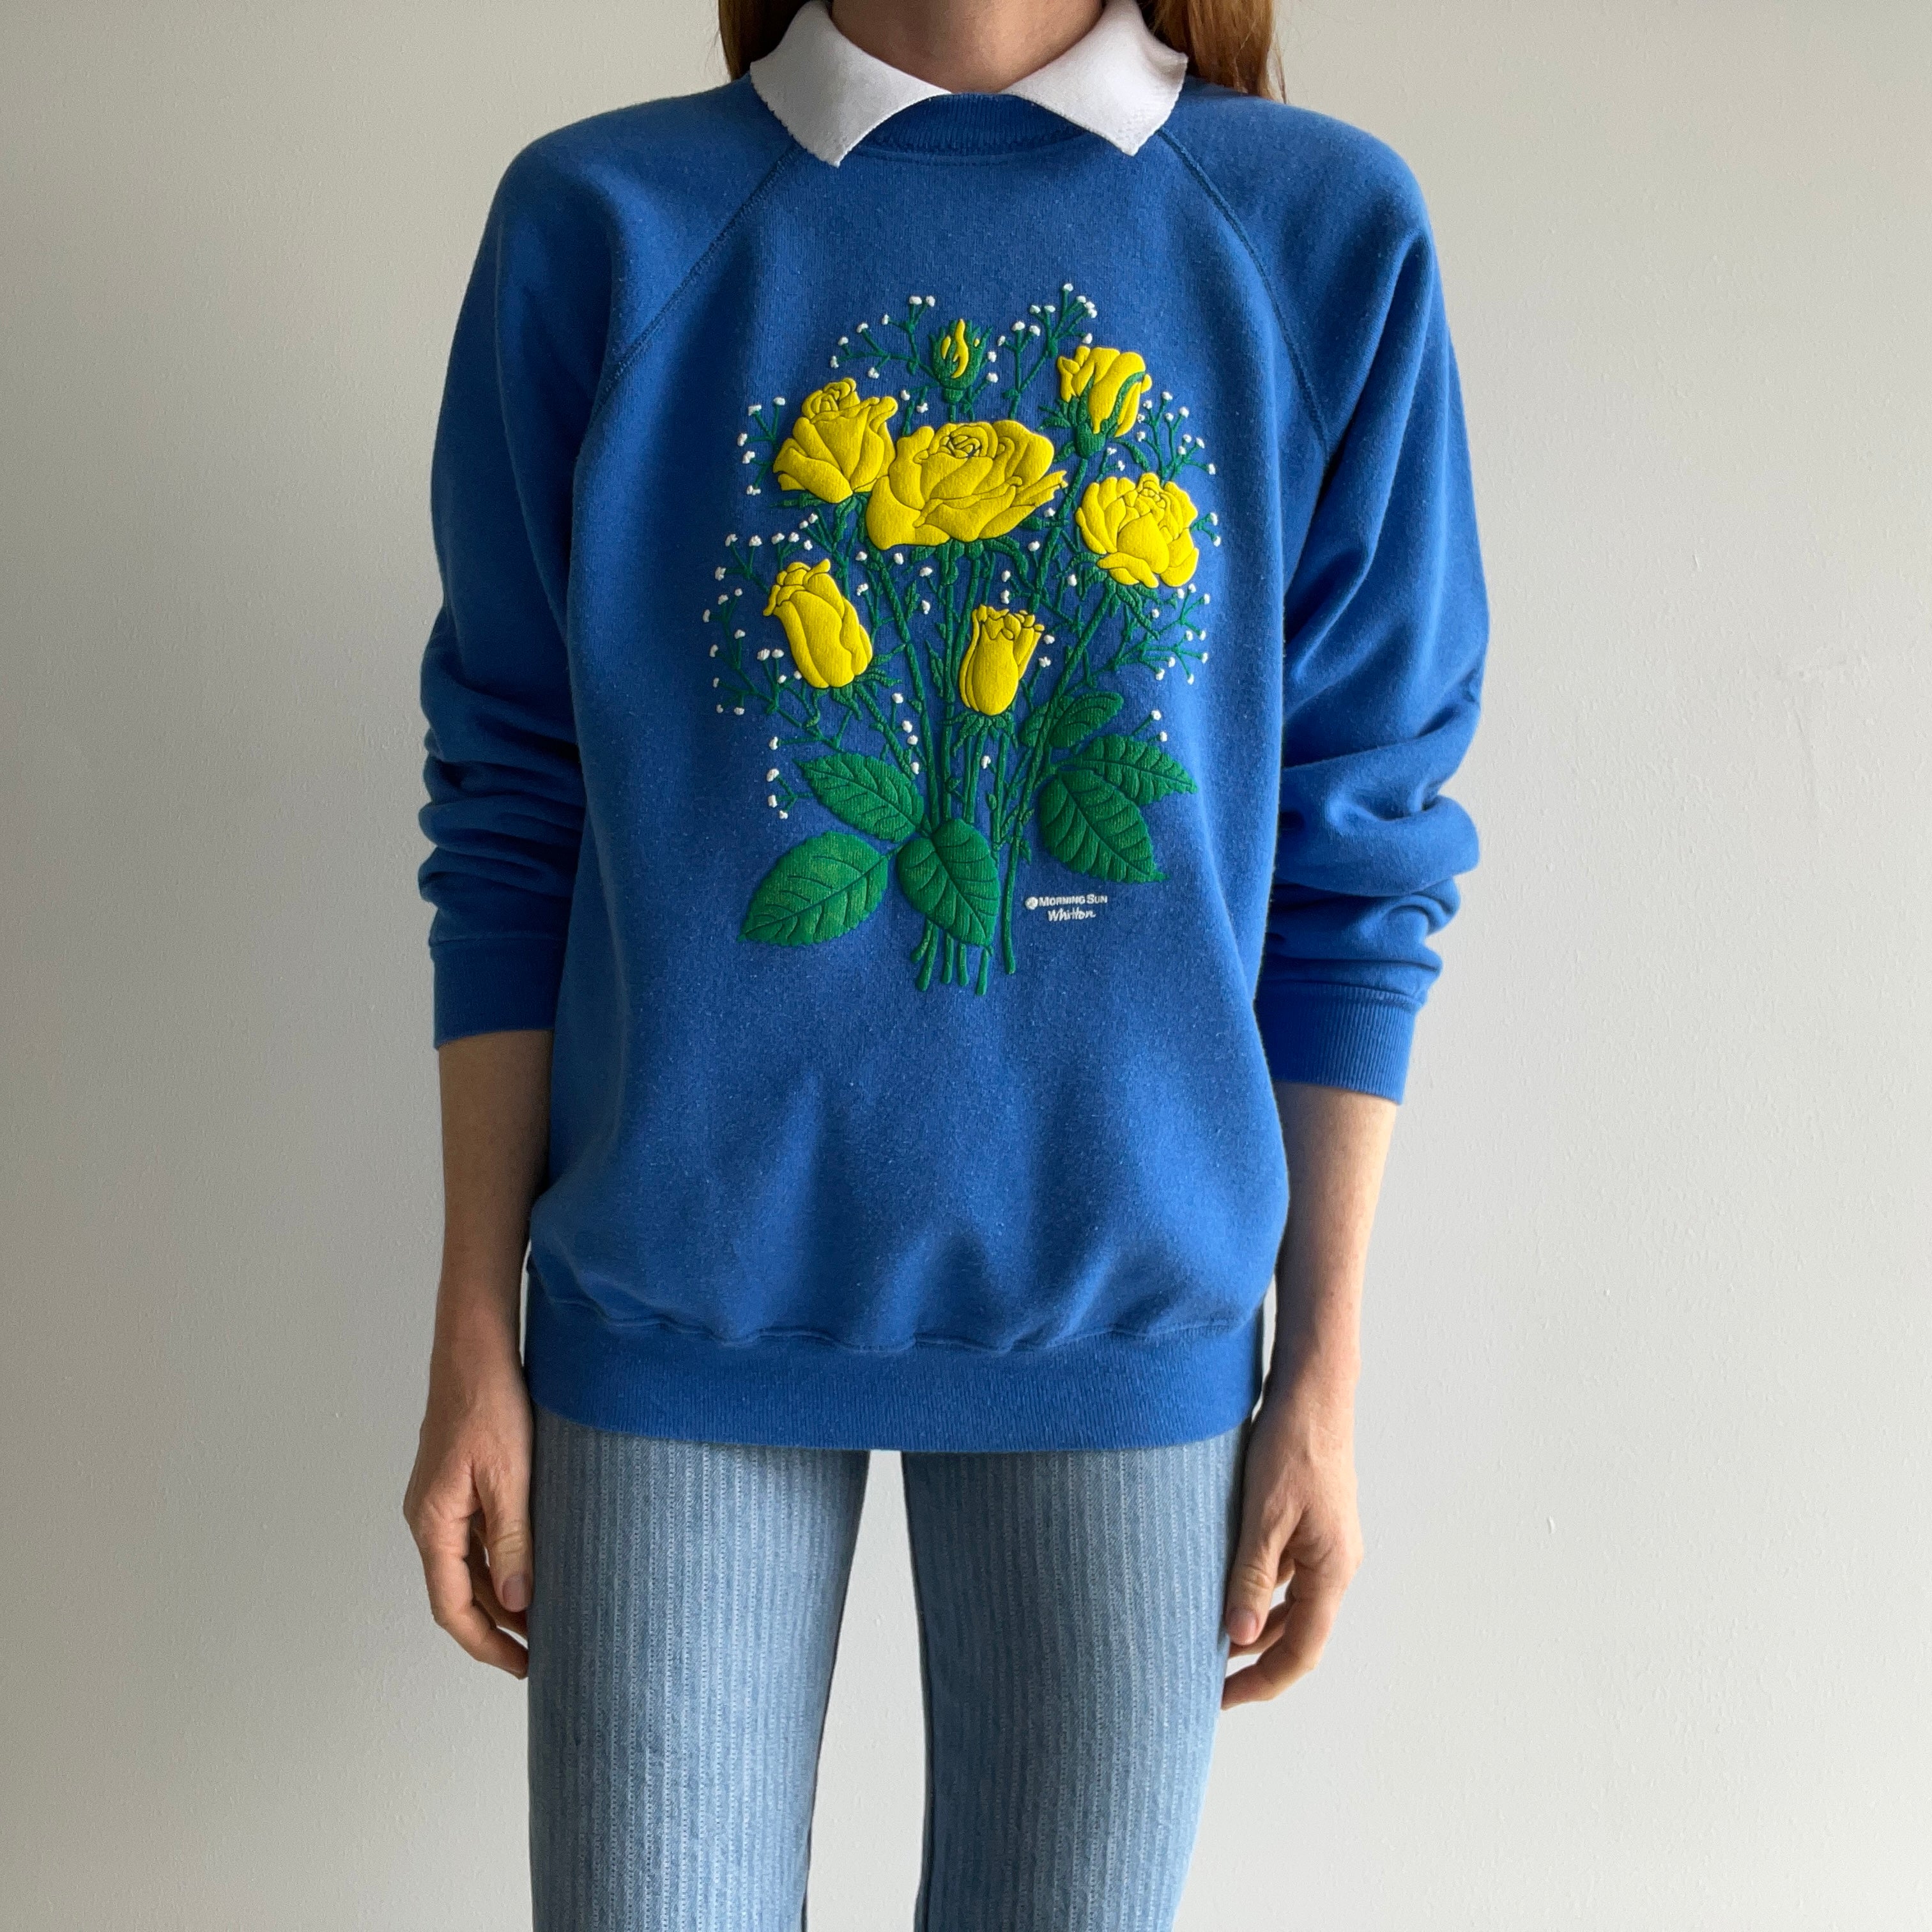 1980s Morning Star Yellow Roses Built In Polo Sweatshirt - YES PLEASE